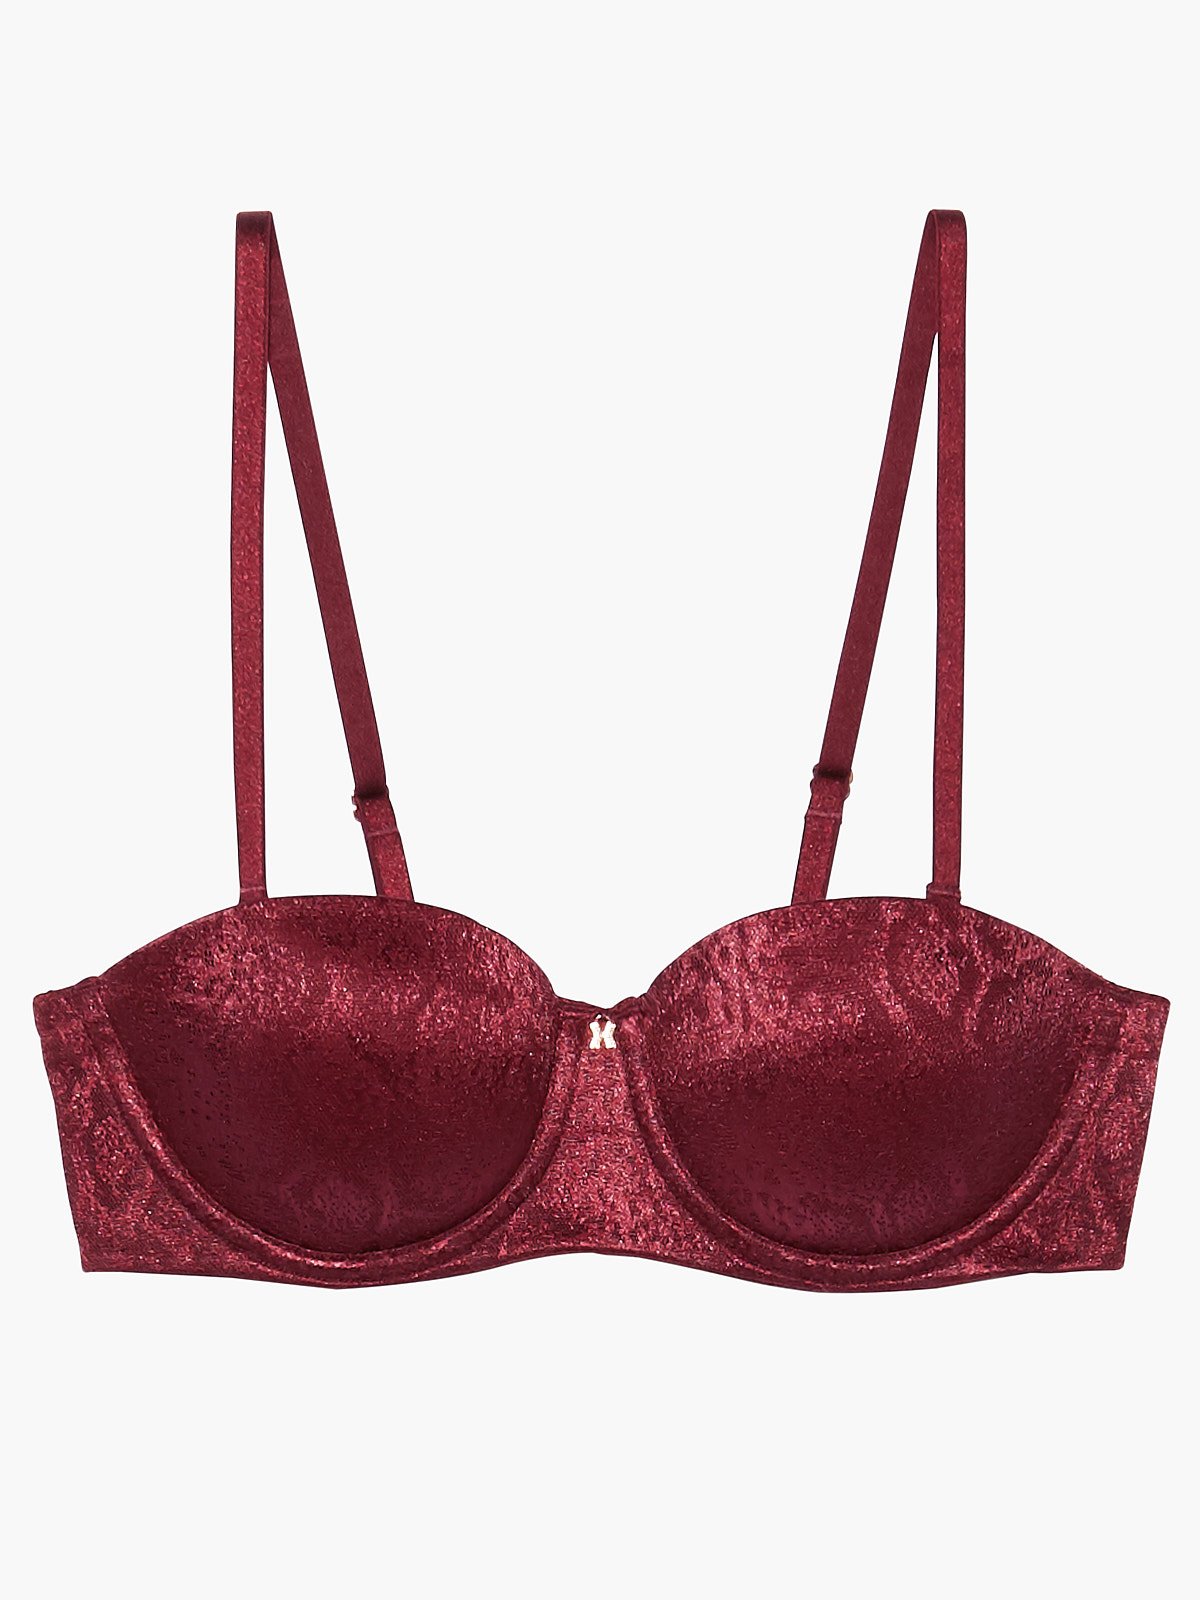 Savage X Fenty Red Candy Hearts Unlined Lace Balconette Bra 38DD Red Size  undefined - $35 - From Jessica